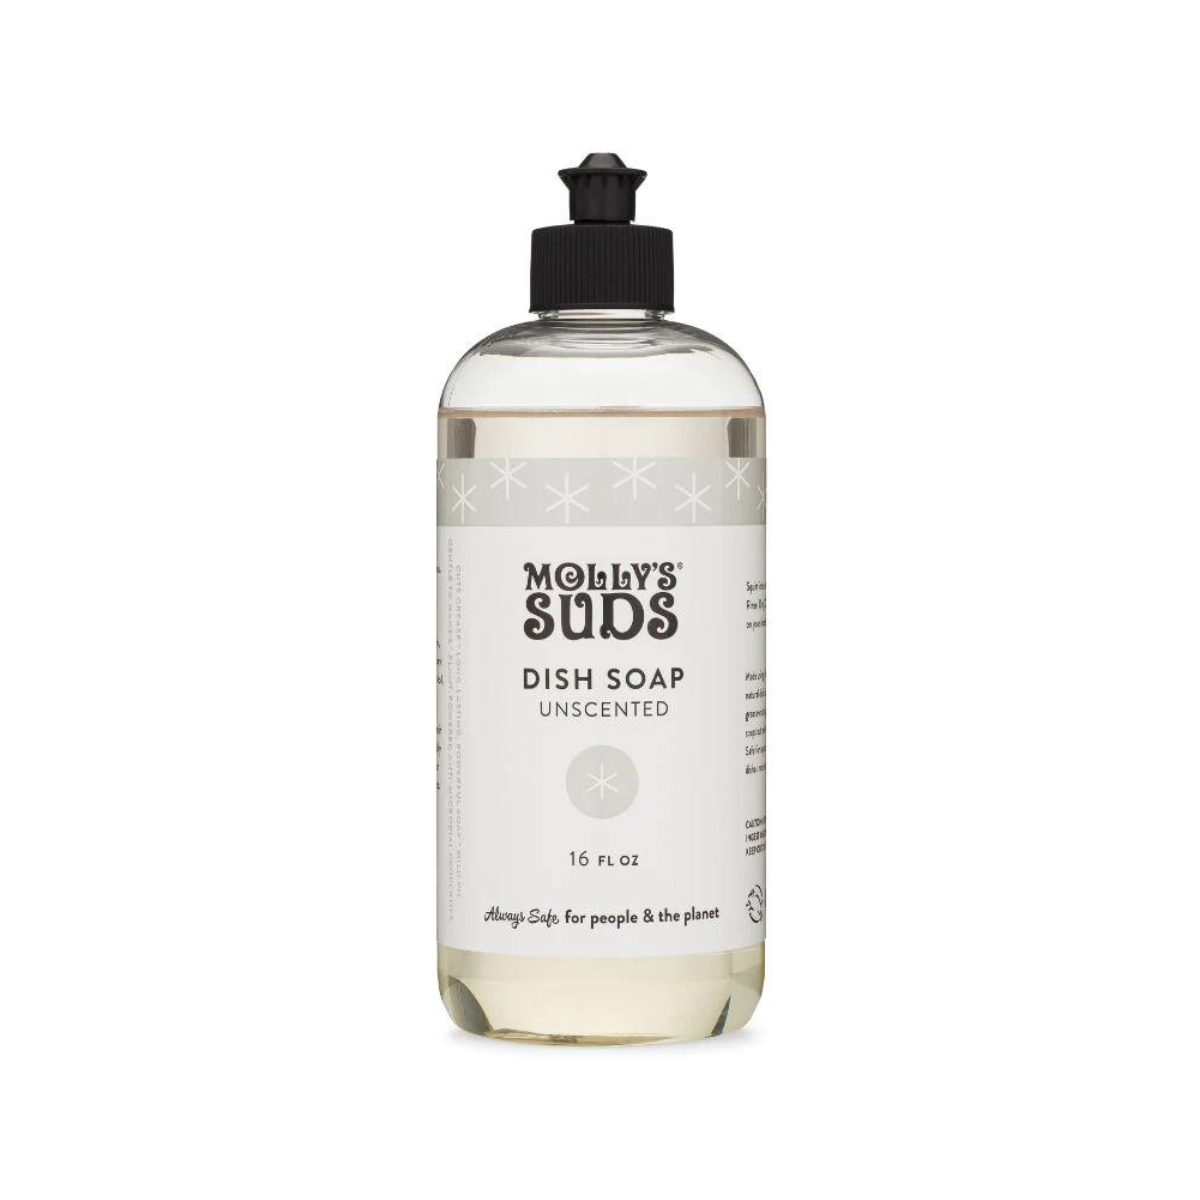 Molly's Suds Natural Dish Soap | Unscented